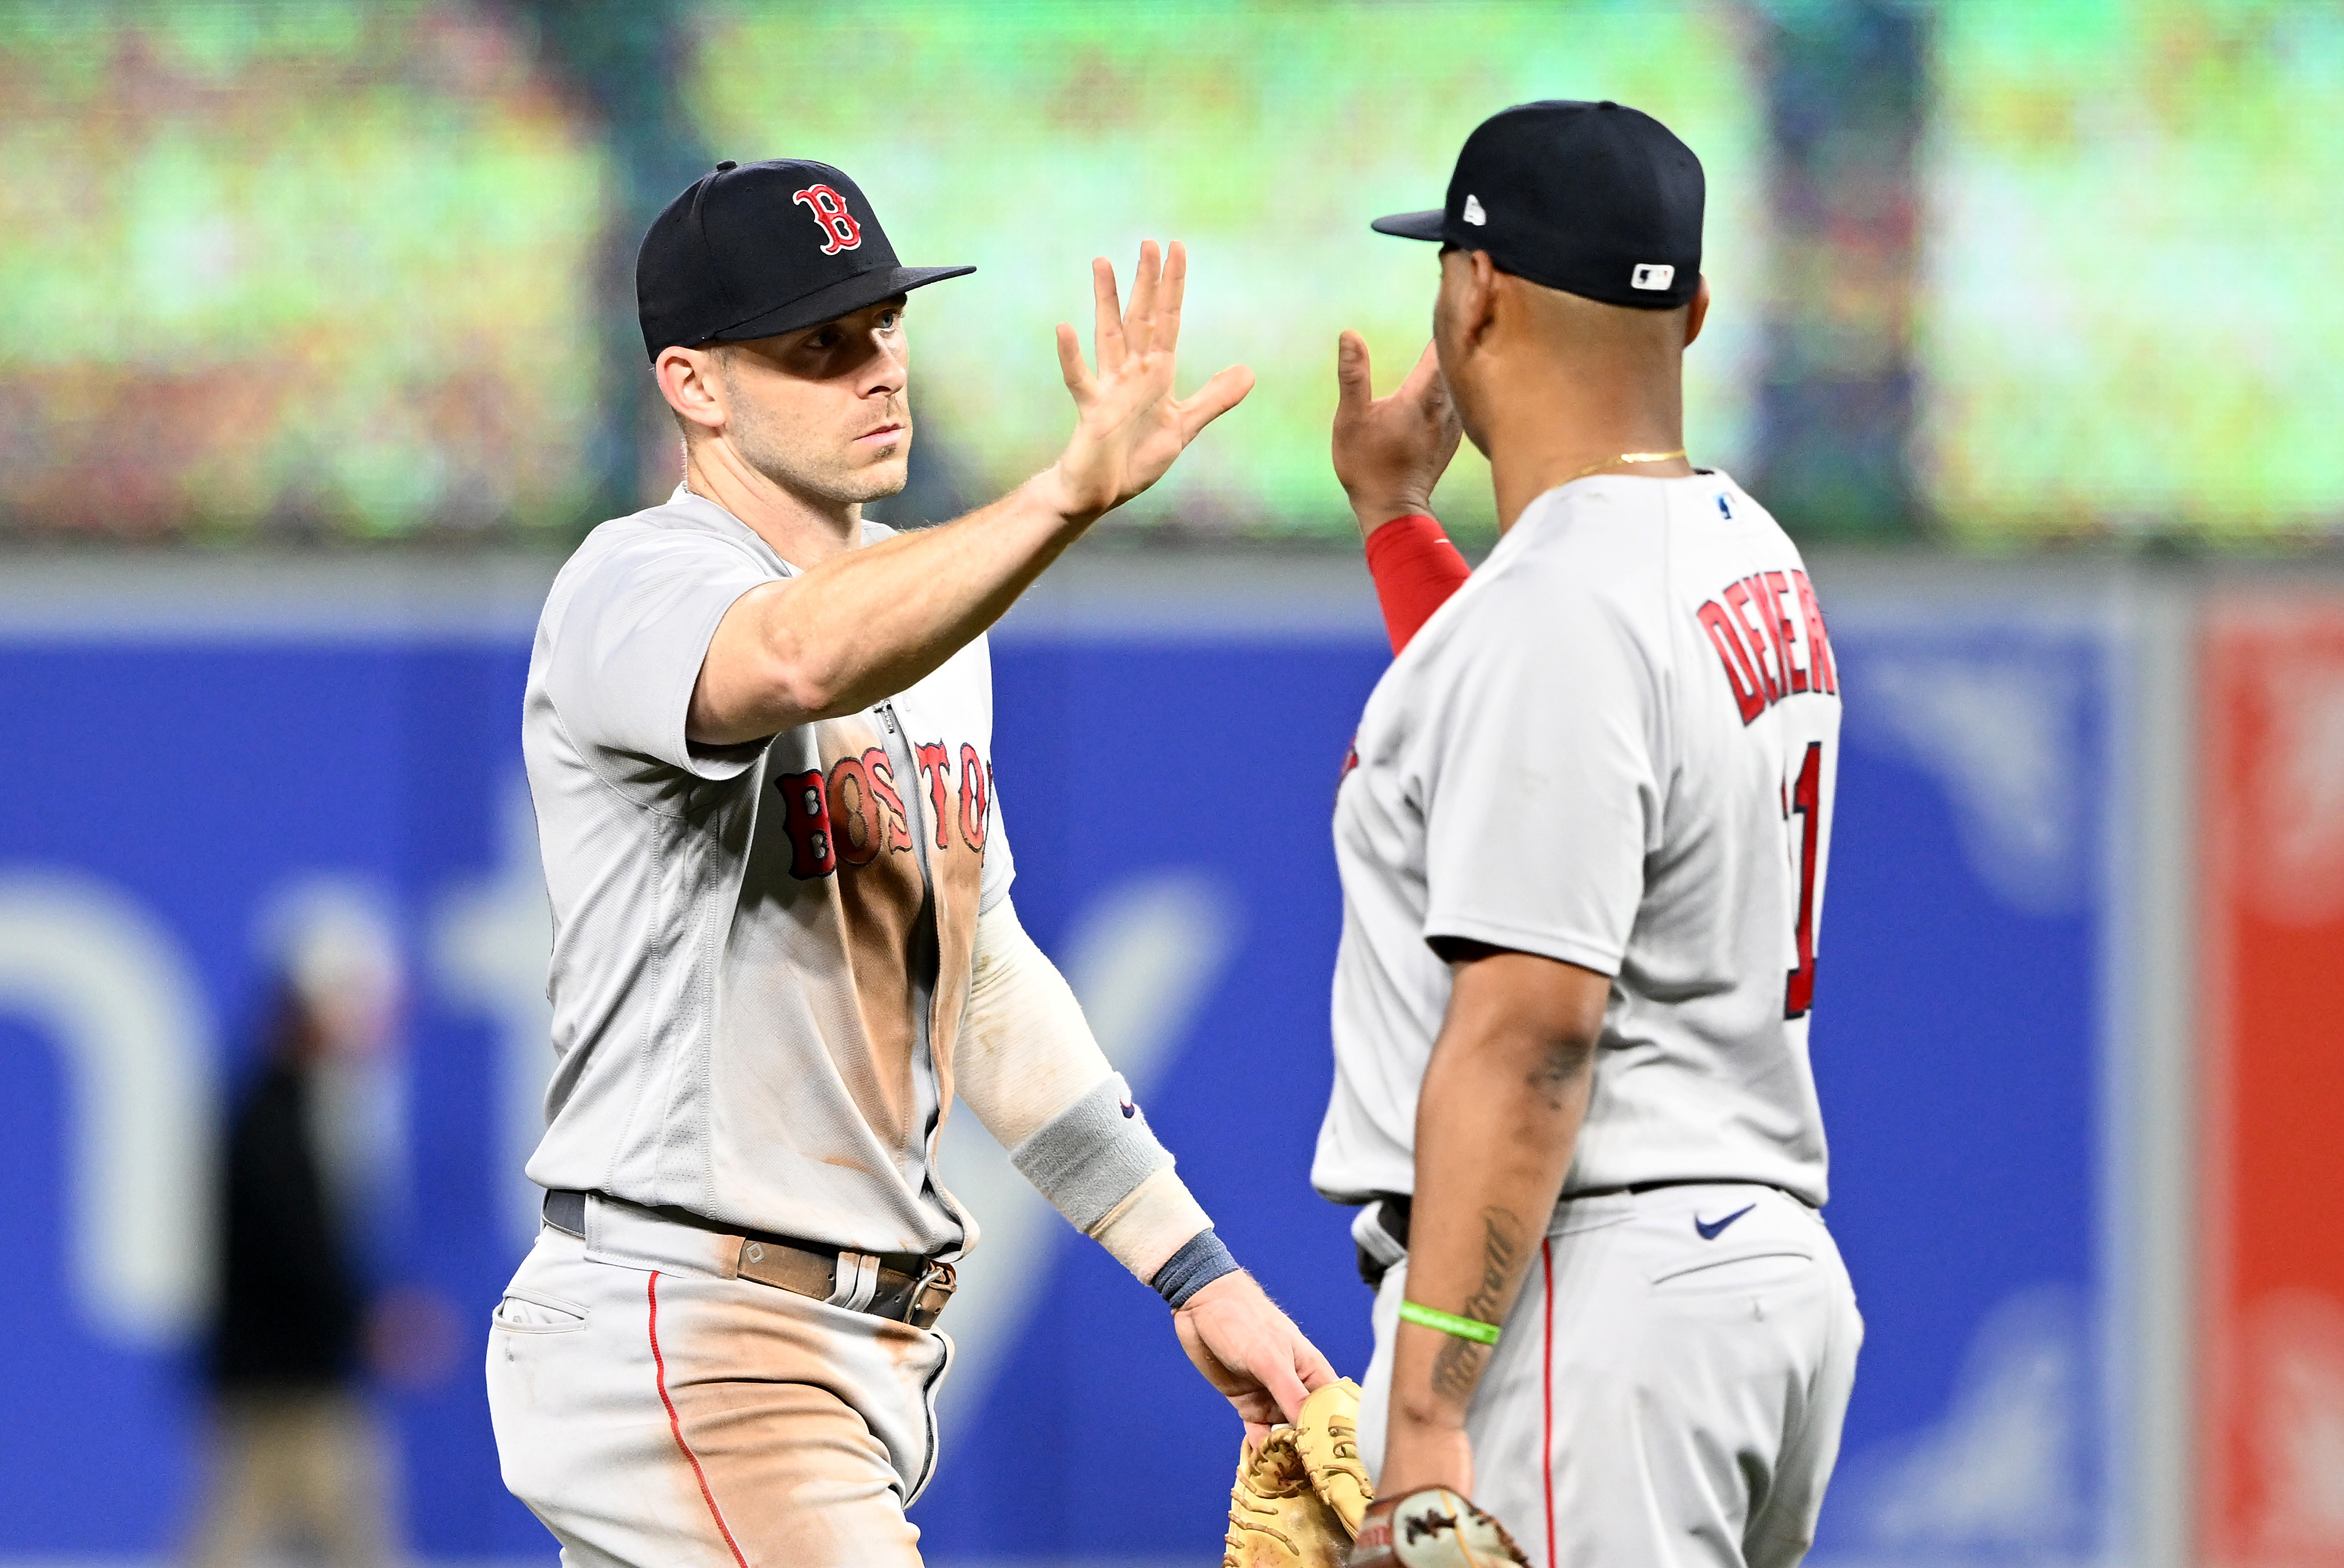 Red Sox reportedly sign jersey patch deal with MassMutual